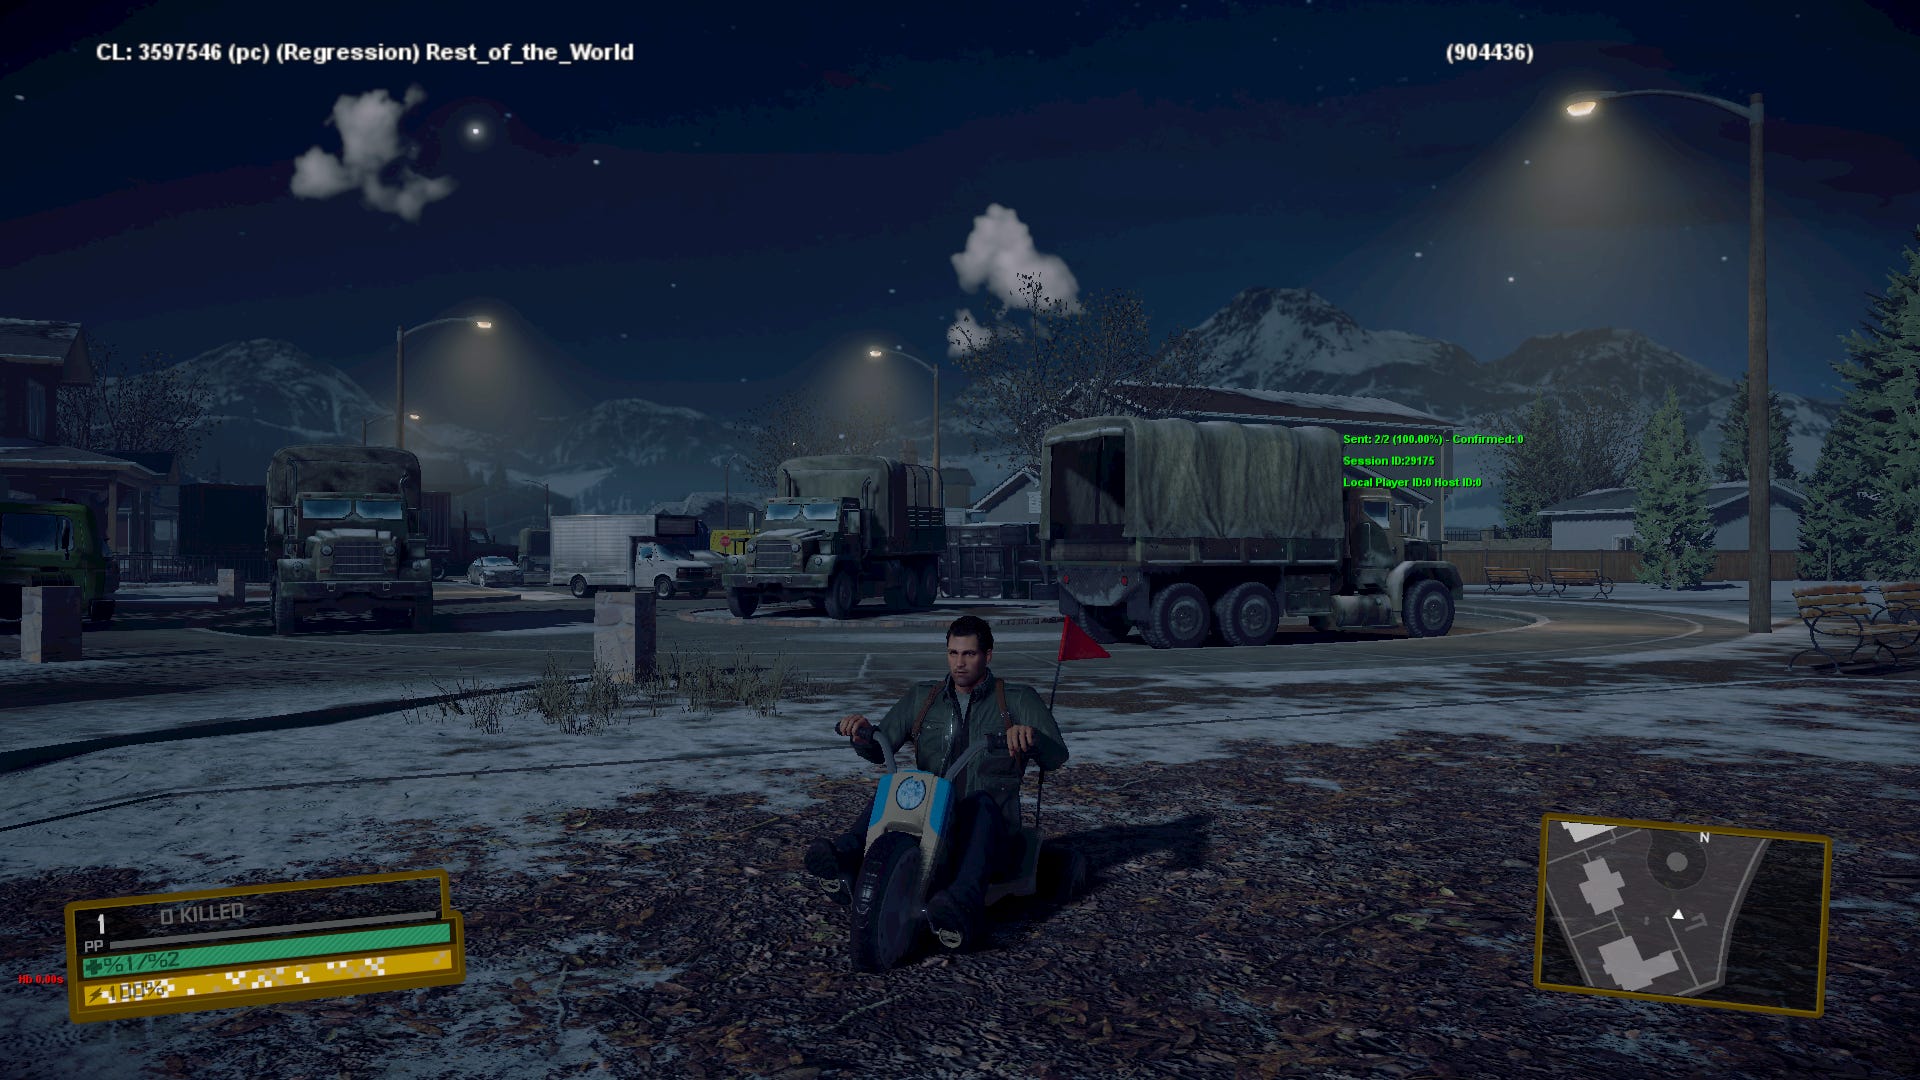 Leaked Dead Rising 5 footage shows off cancelled game